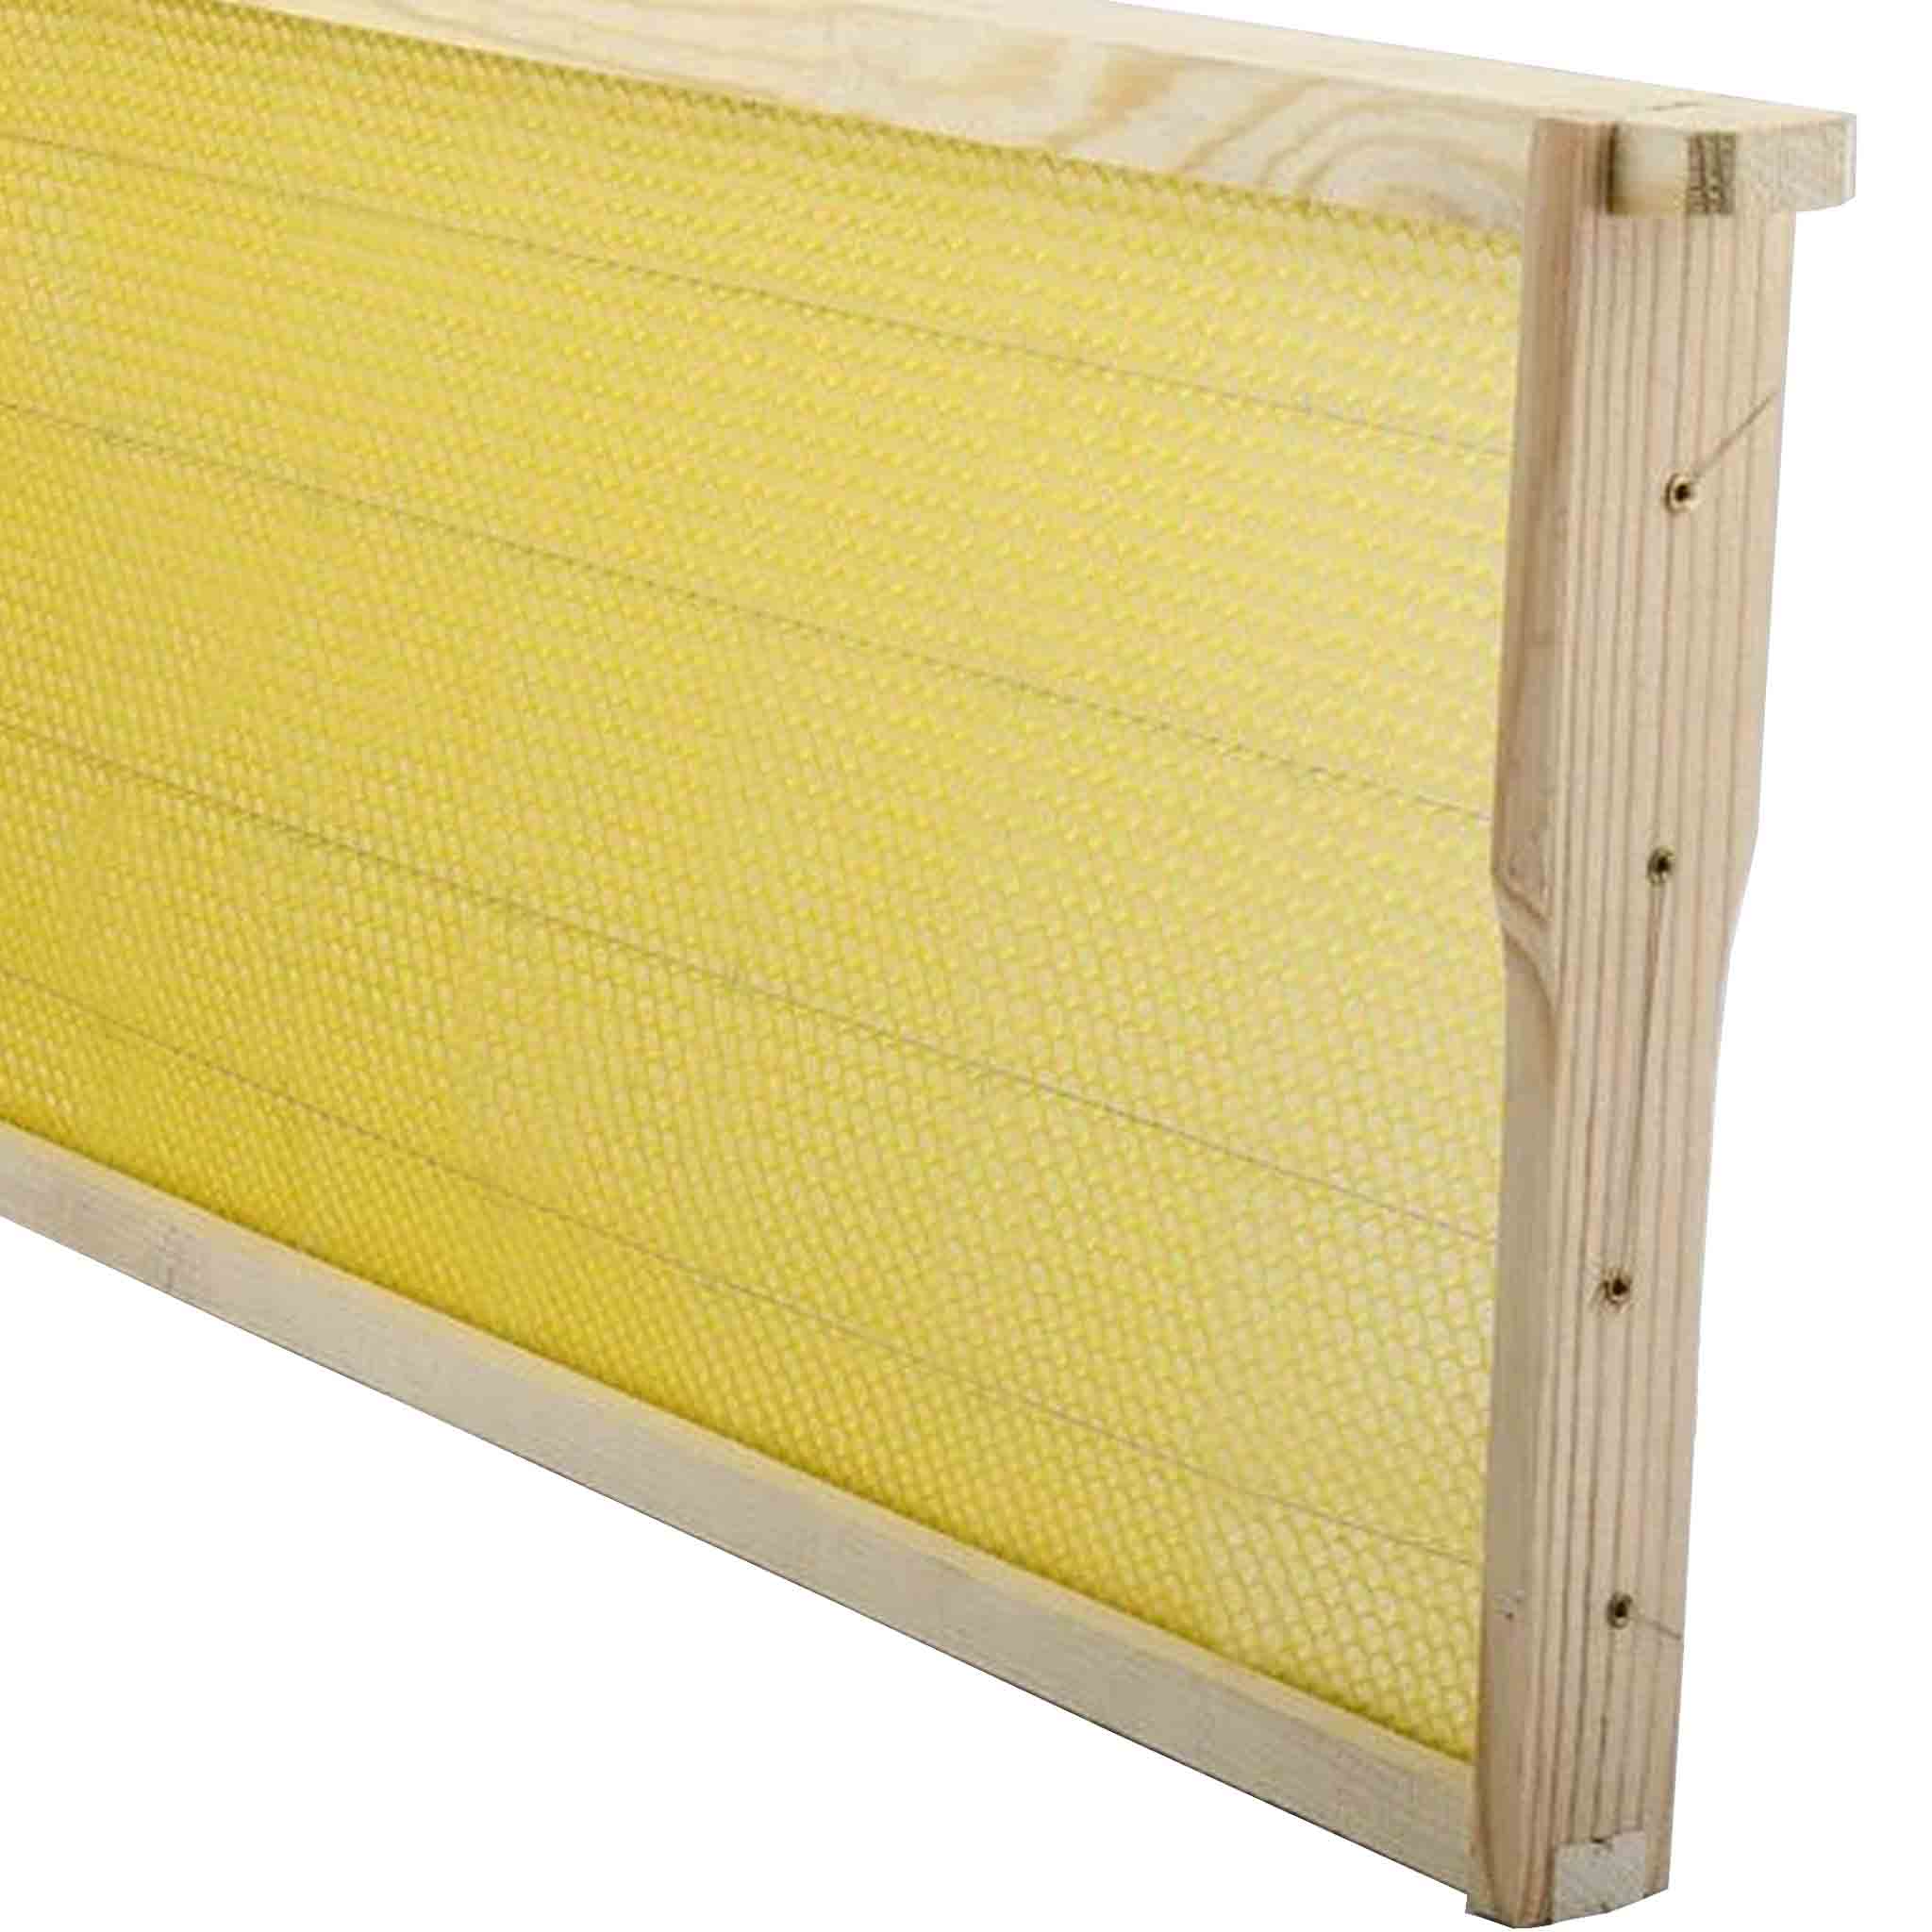 Wooden Frames assembled with Wire and Australian Bees Wax Foundation - Hive Parts collection by Buzzbee Beekeeping Supplies